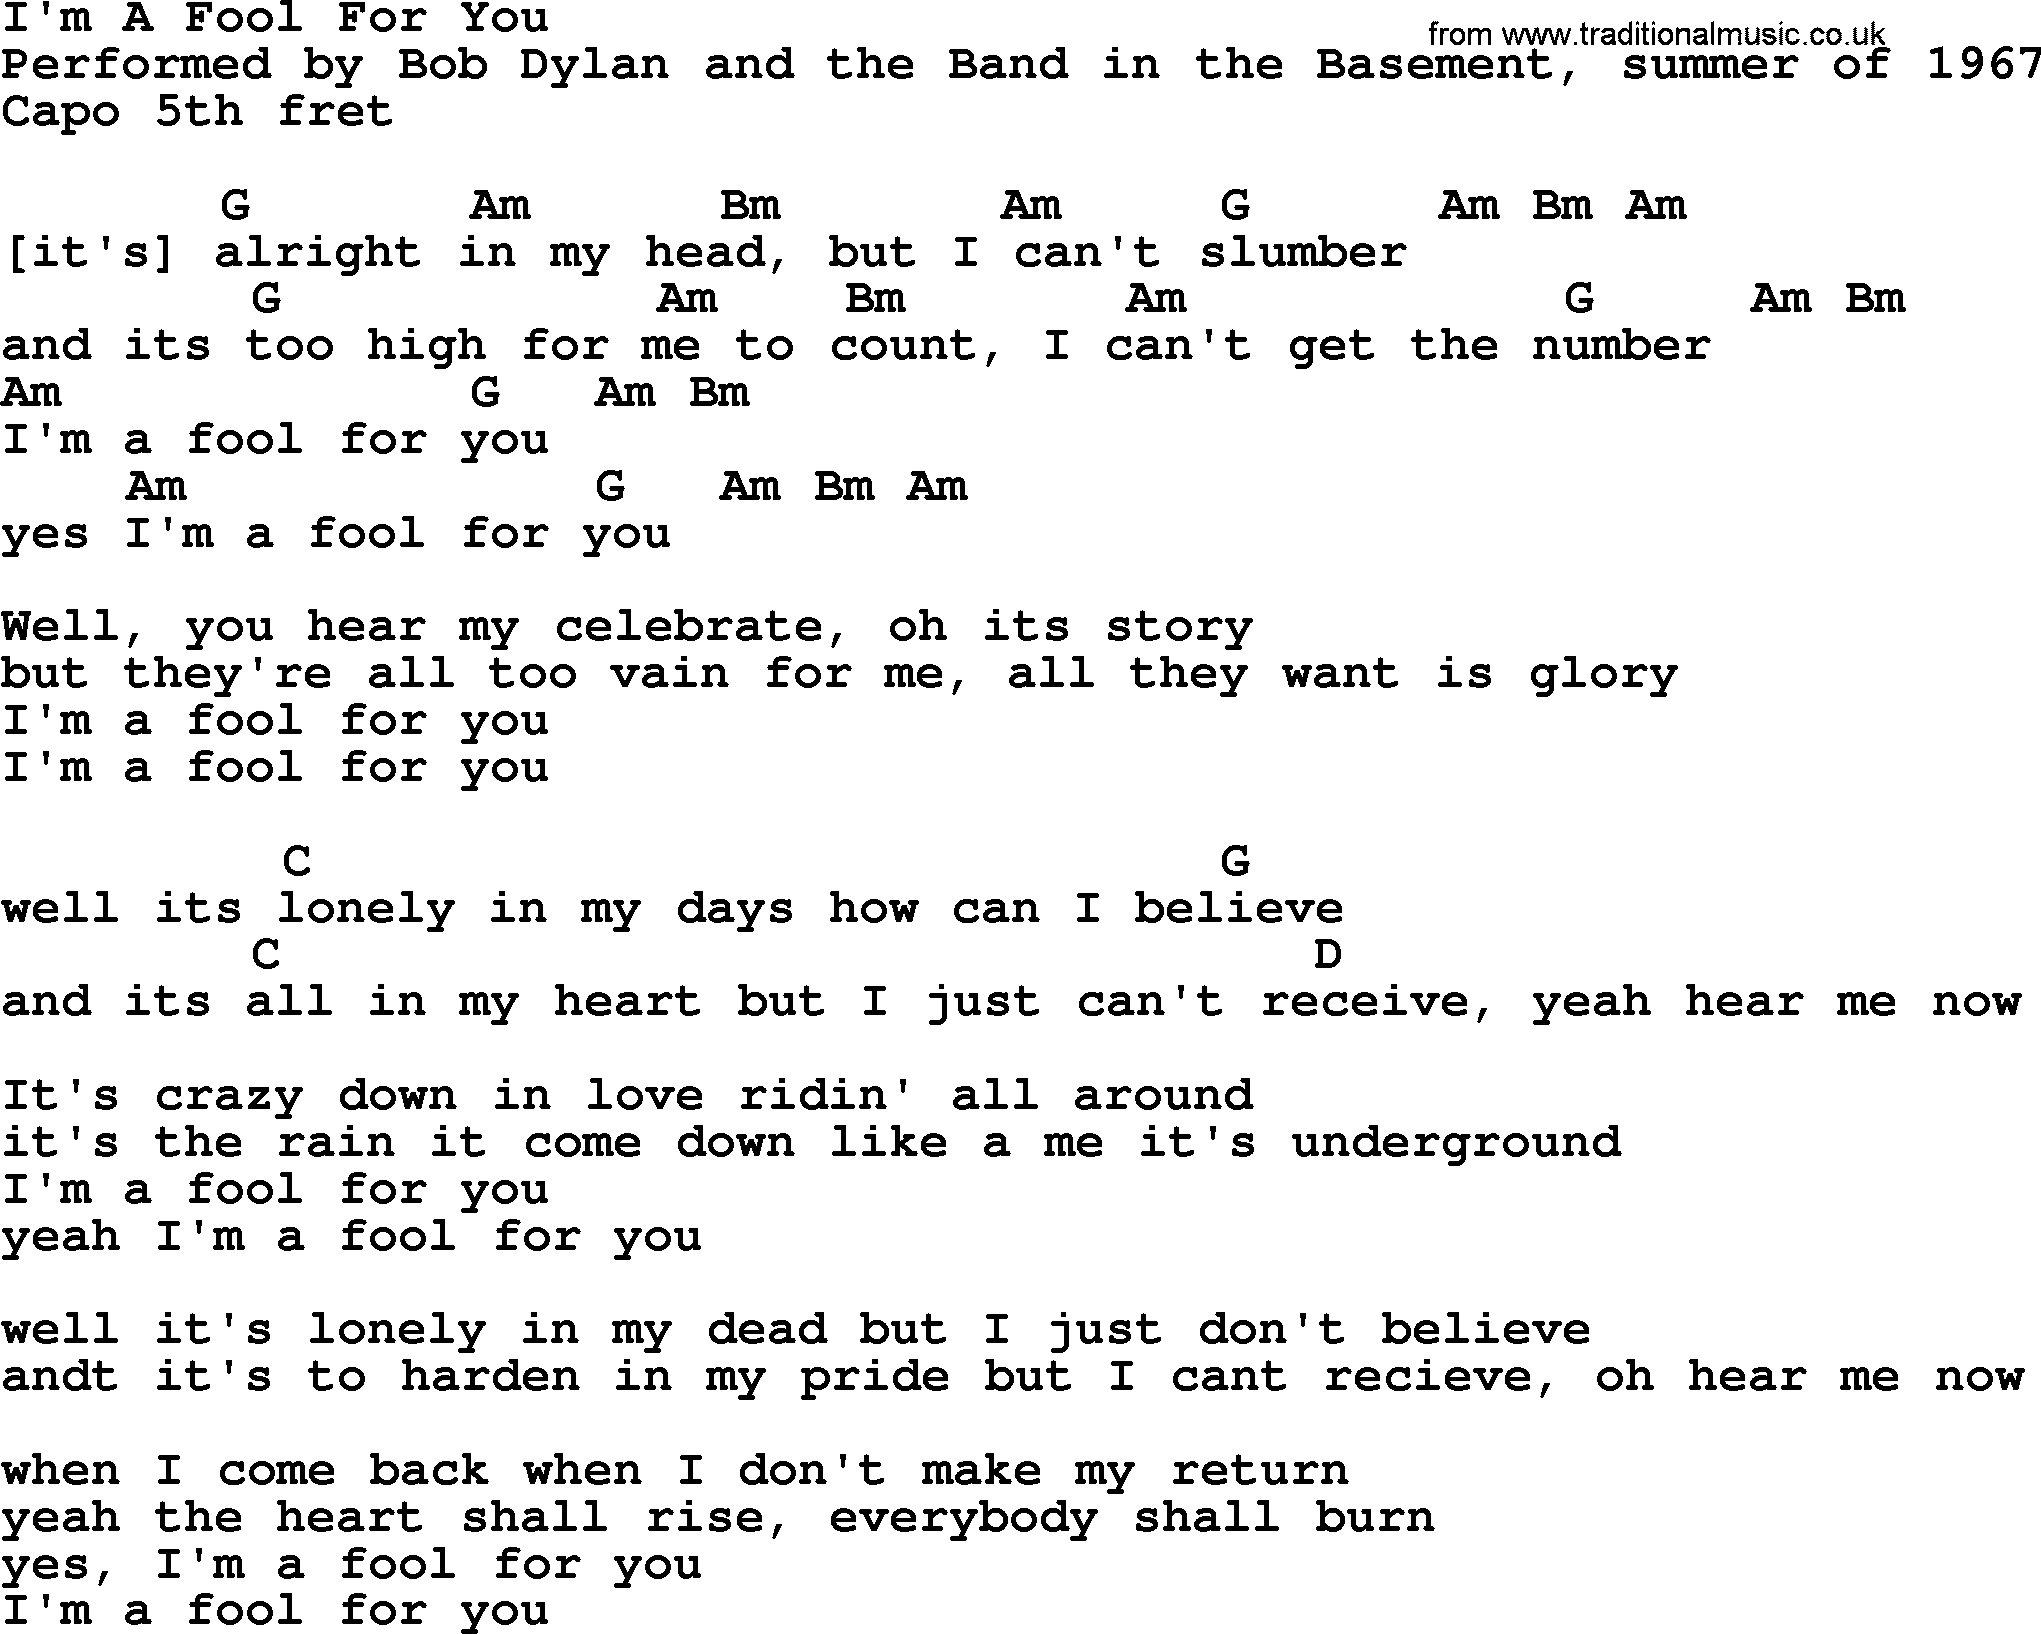 Bob Dylan song, lyrics with chords - I'm A Fool For You